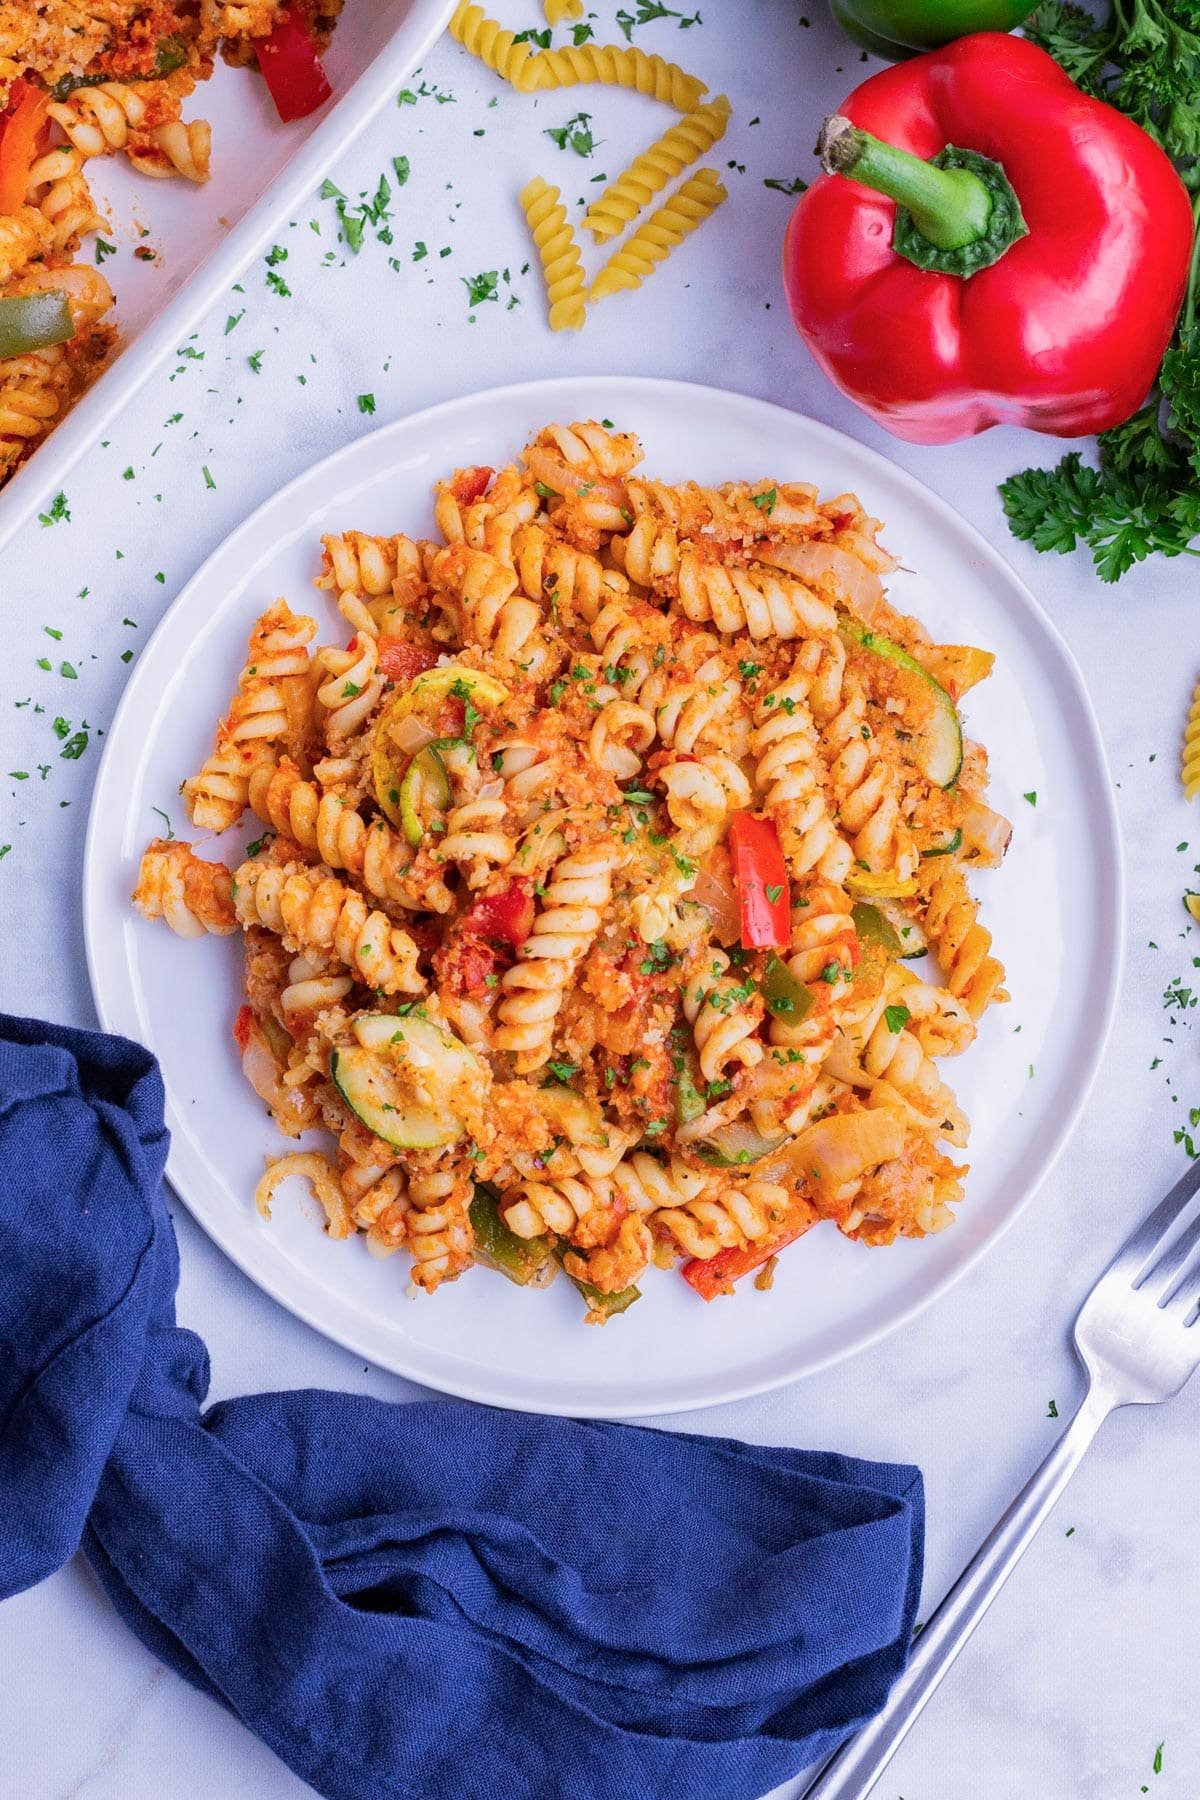 A roasted vegetable pasta bake is served in a white bowl.